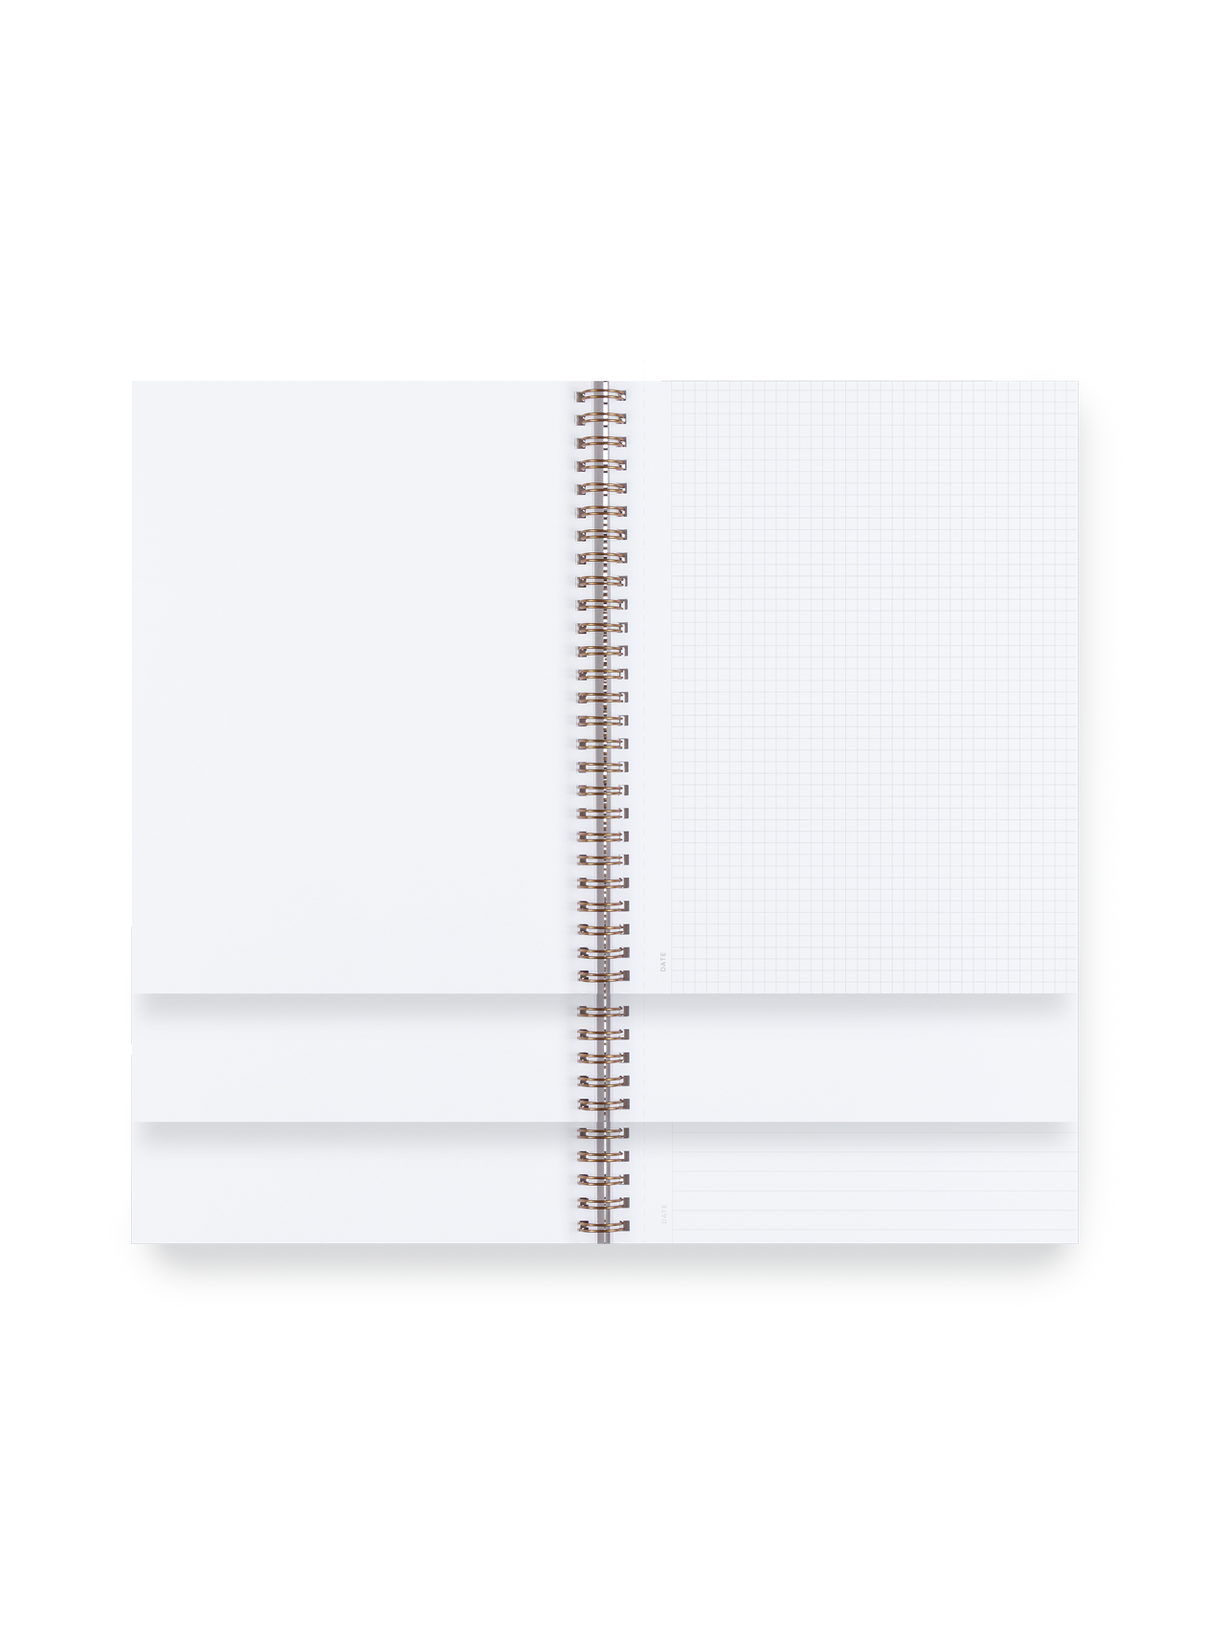 Appointed Workbook three interior - grid, blank, and lined stacked